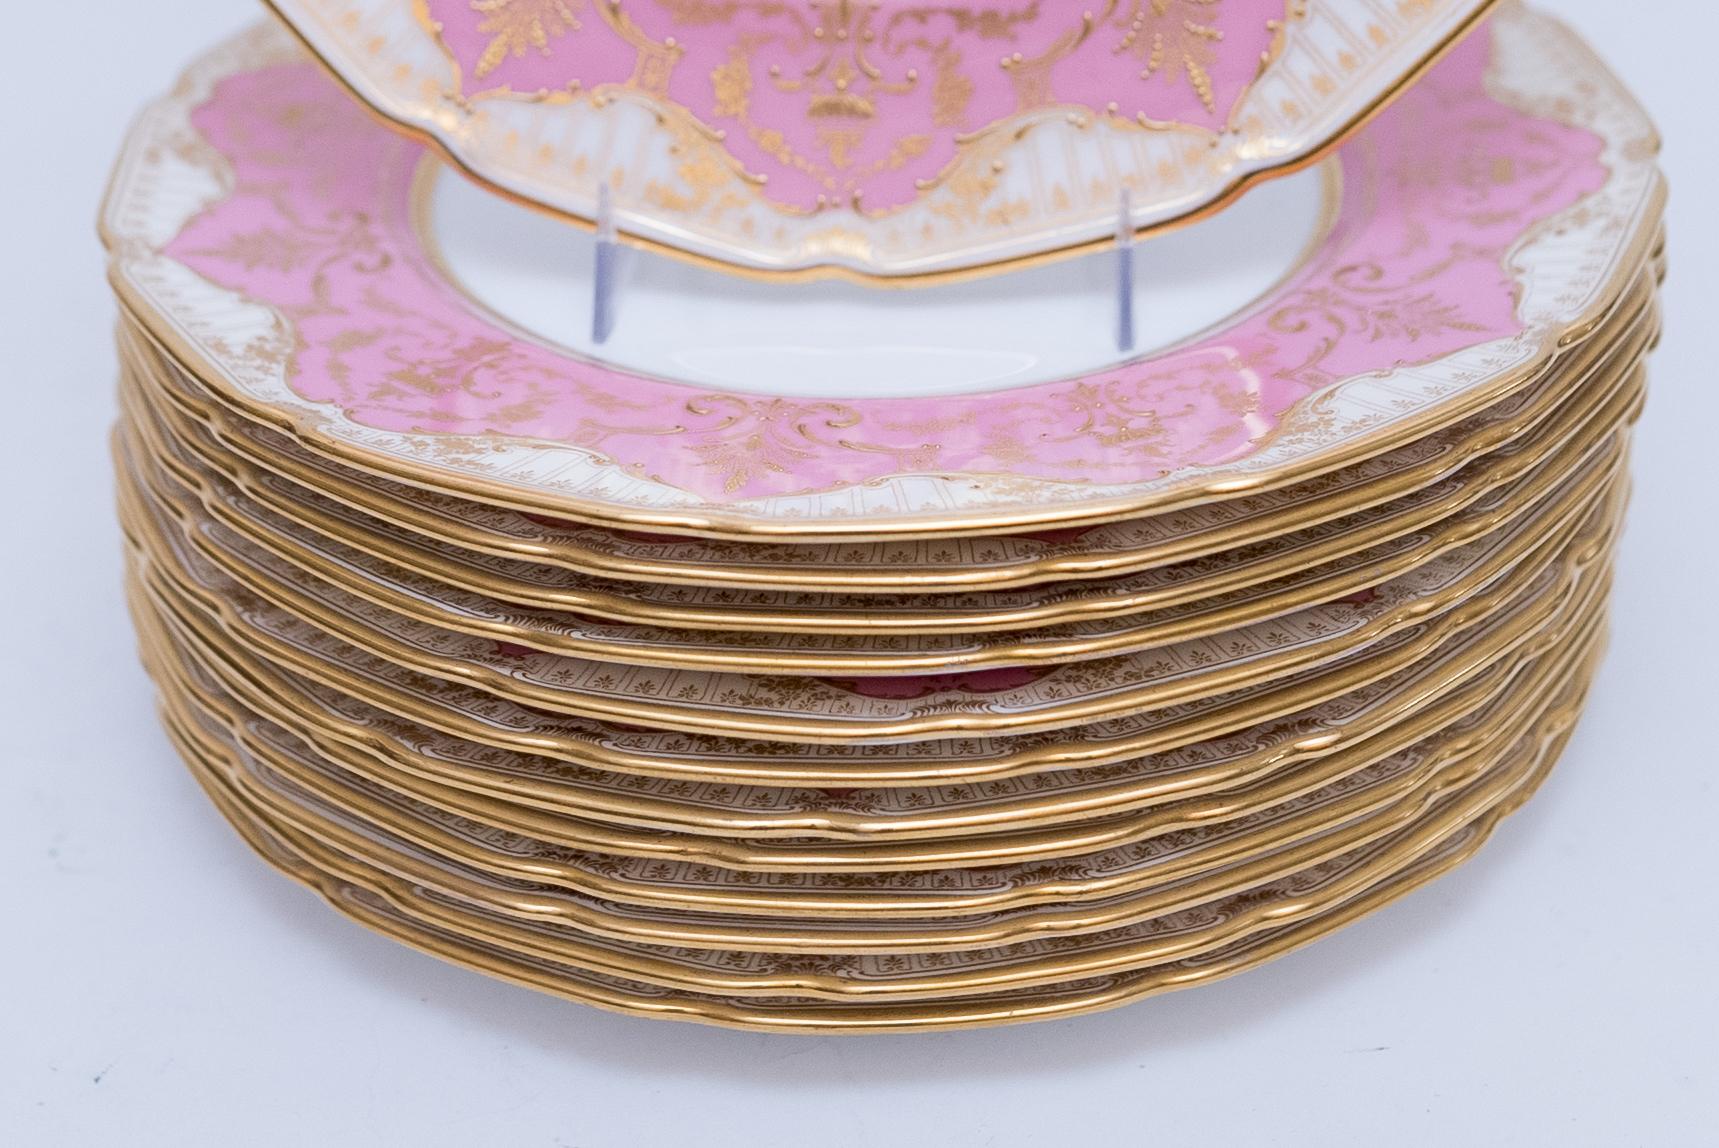 Hand-Crafted Set of 13 Antique English Dinner Plates circa 1910, Raised Gilding on Pink